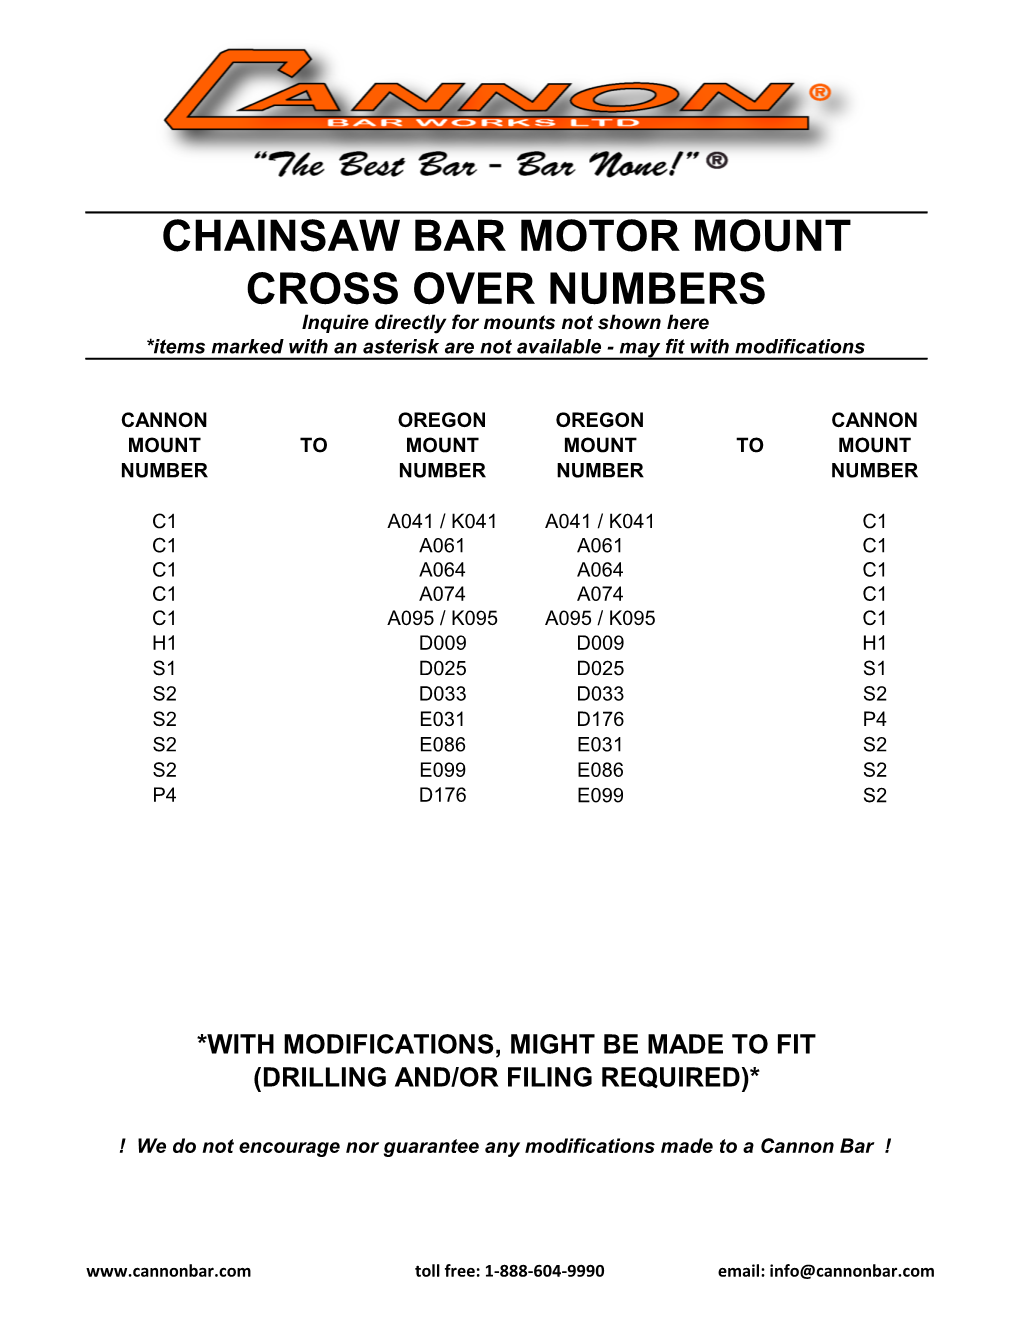 CHAINSAW BAR MOTOR MOUNT CROSS OVER NUMBERS Inquire Directly for Mounts Not Shown Here *Items Marked with an Asterisk Are Not Available - May Fit with Modifications